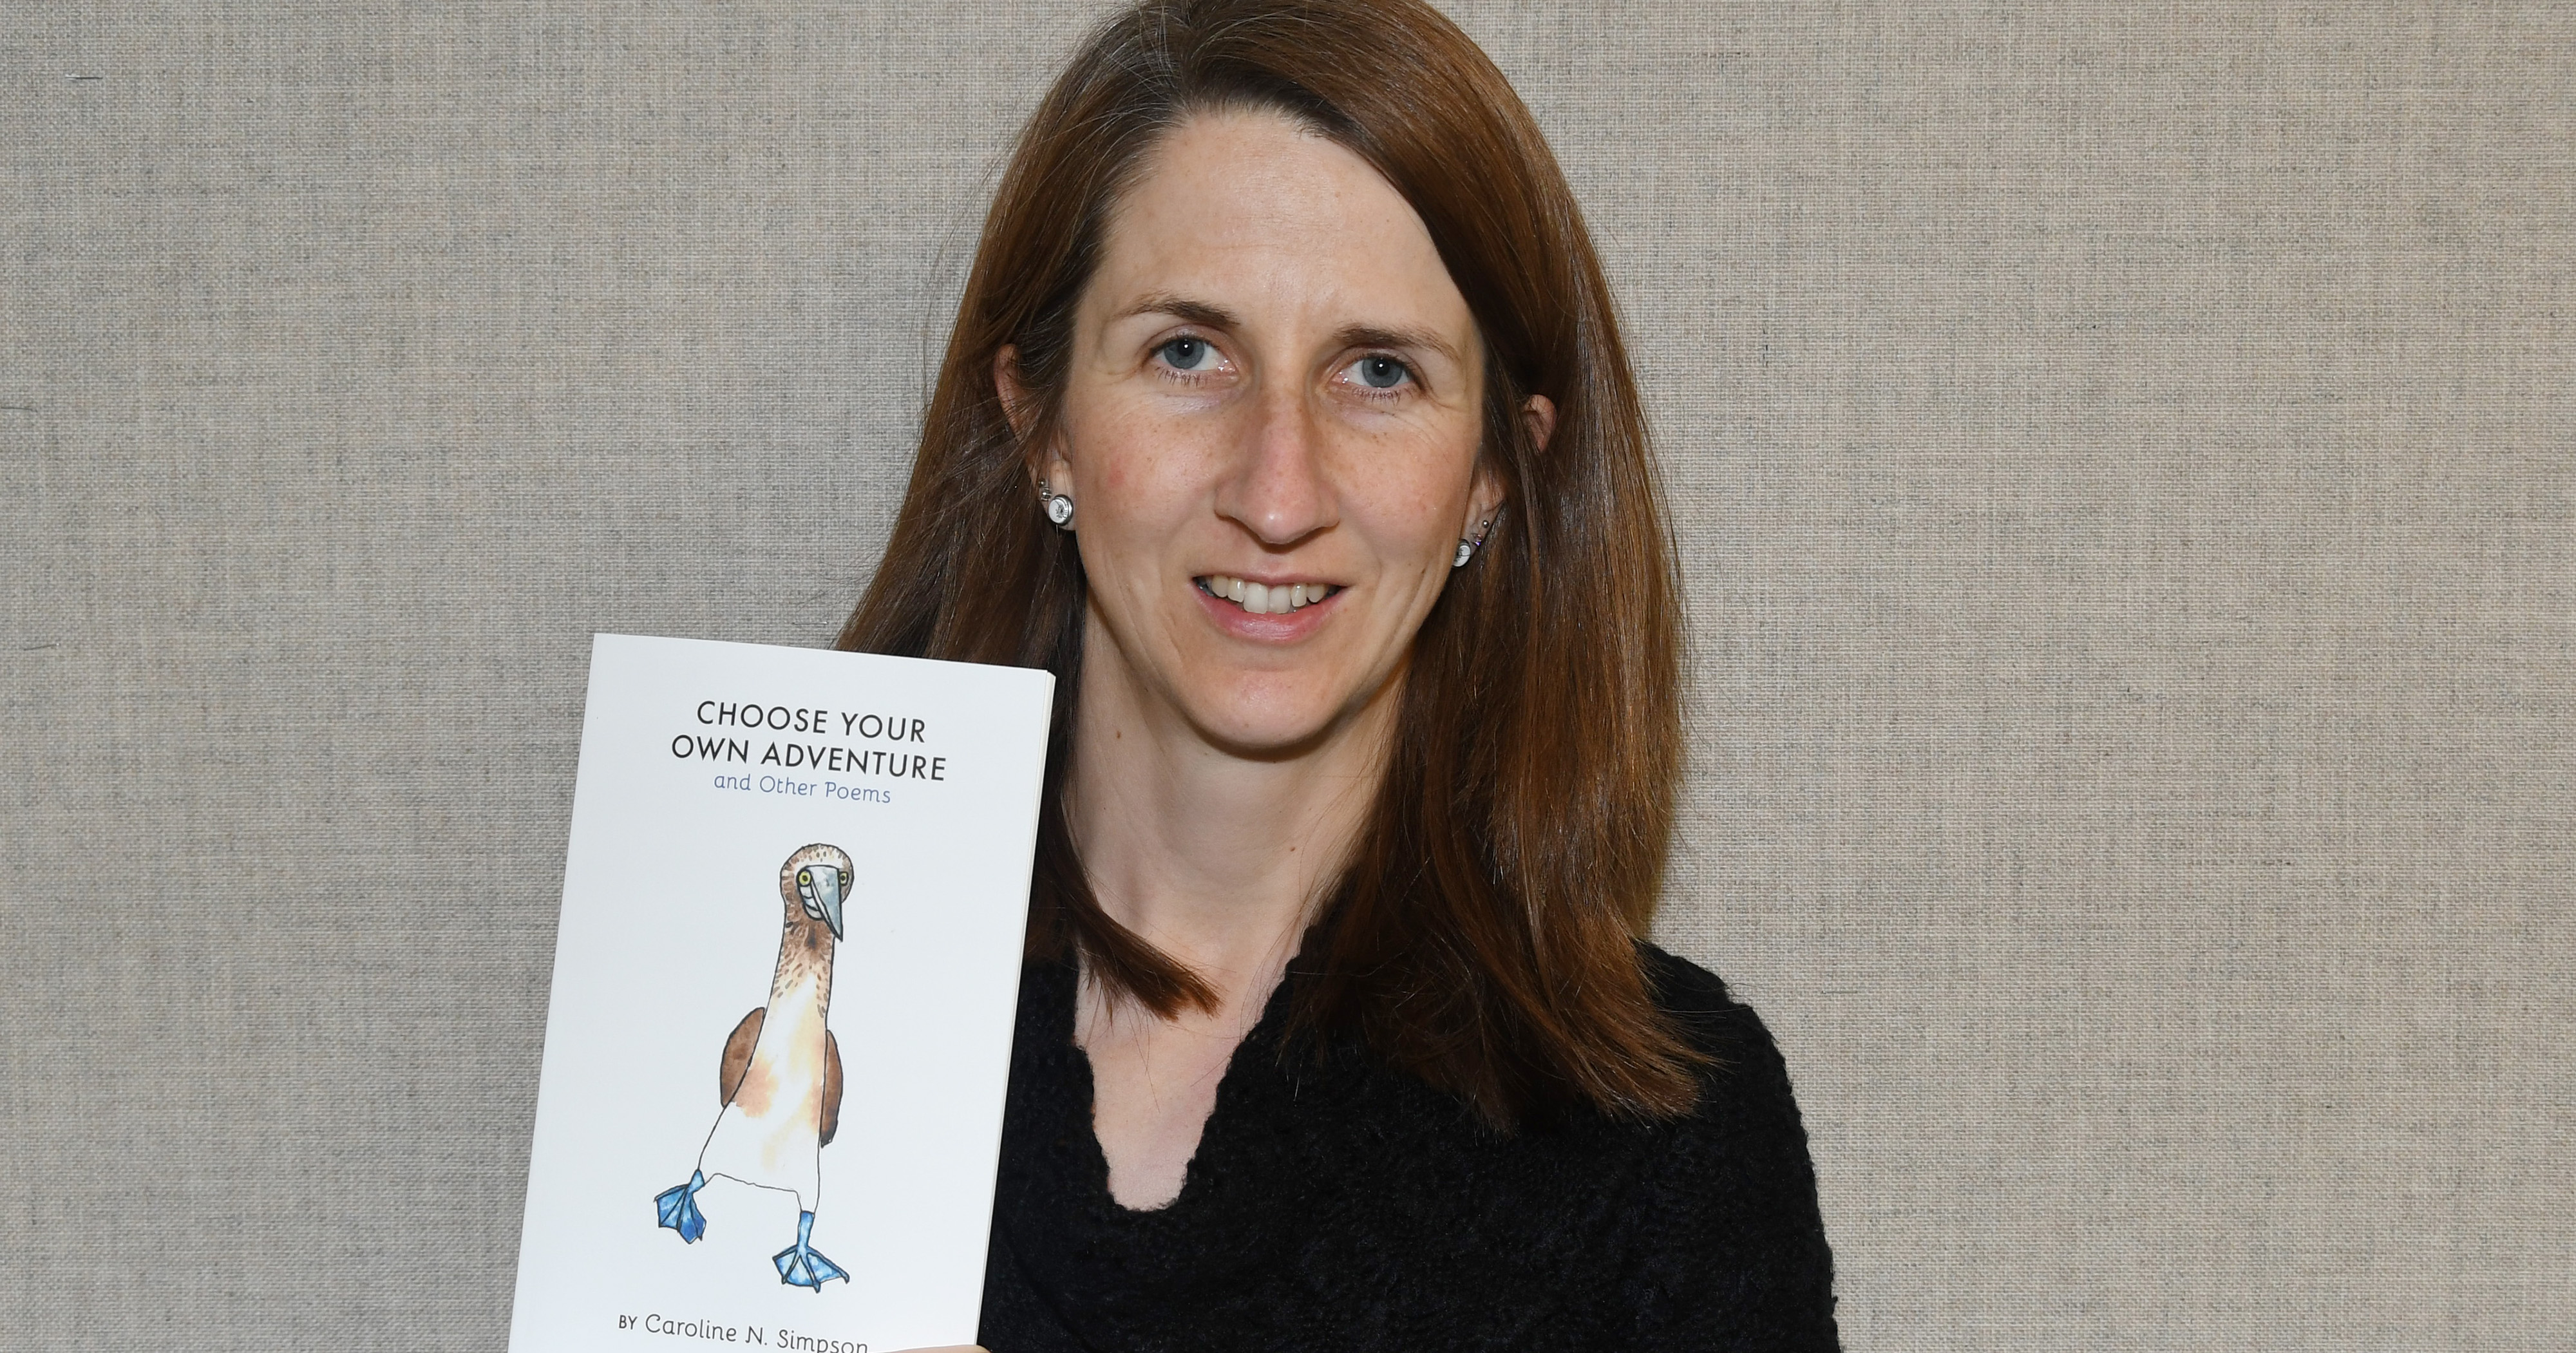 Caroline Simpson, an adjunct assistant professor, has published a book of poems inspired by her trip to the Galapagos Islands.